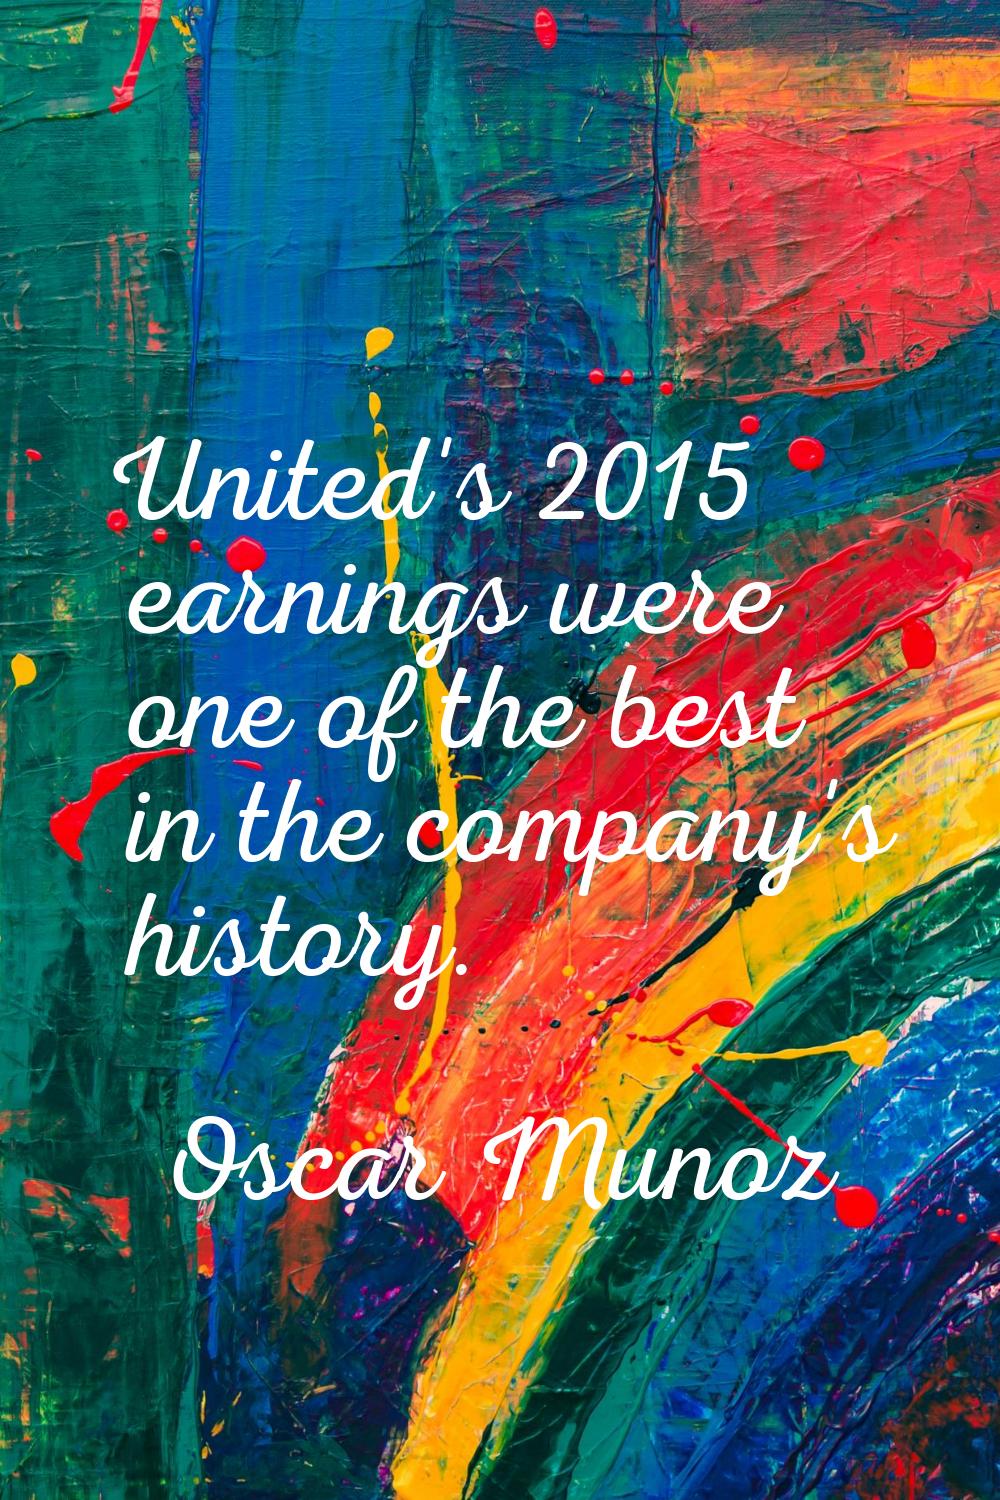 United's 2015 earnings were one of the best in the company's history.